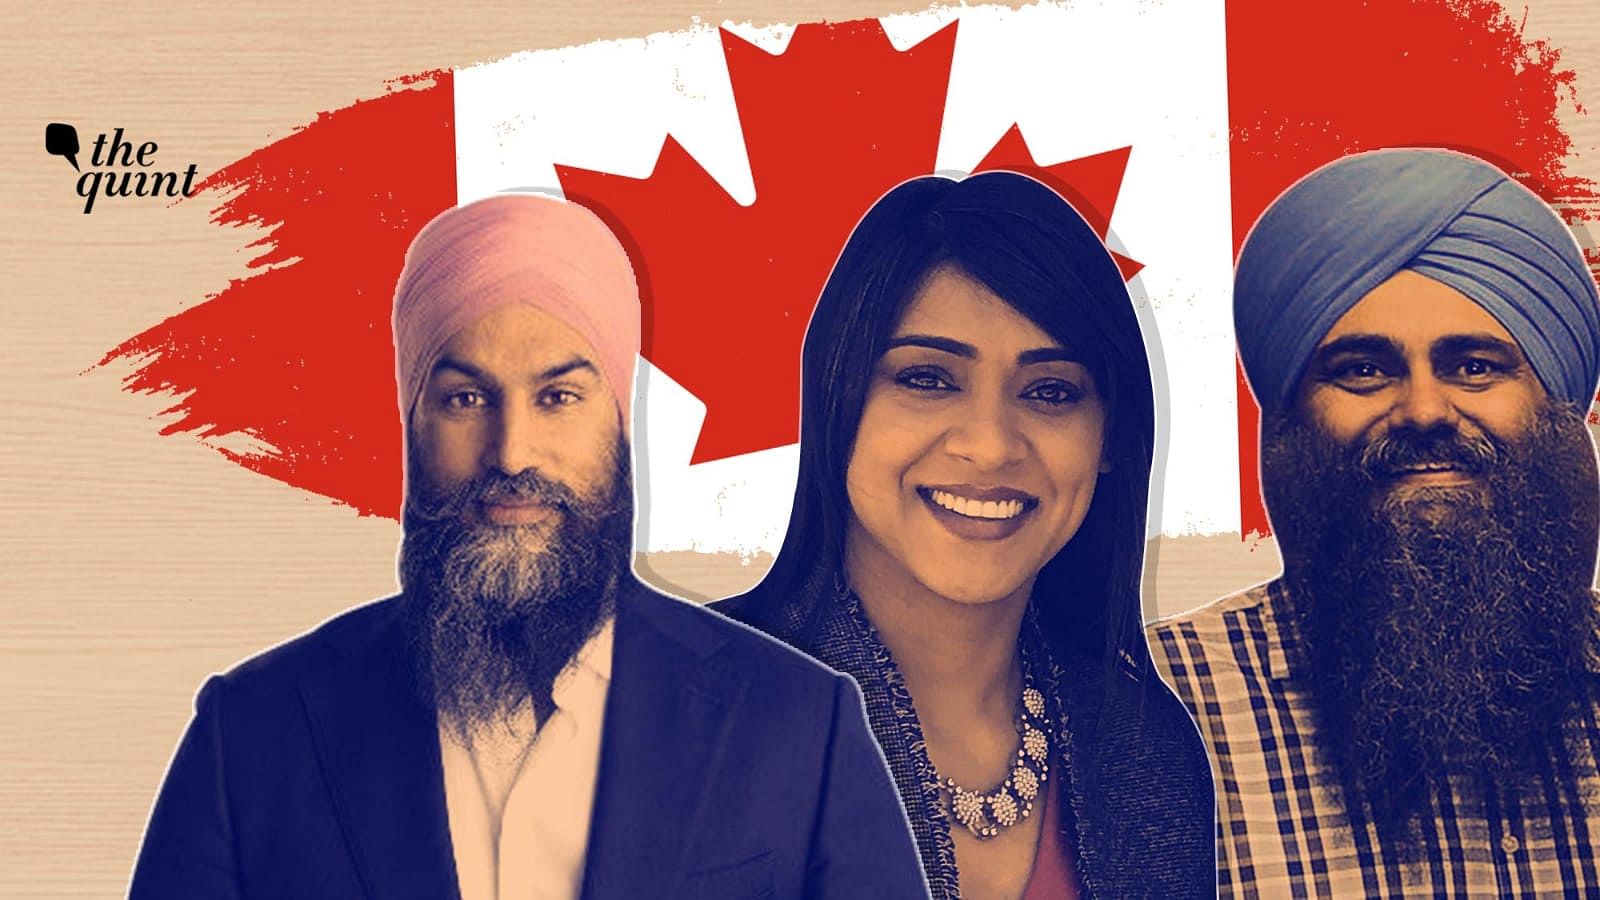 <div class="paragraphs"><p>NDP leader Jagmeet Singh, Diversity Minister&nbsp;Bardish Chagger, and Conservative Party of Canada member Tim Uppal. &nbsp;</p></div>